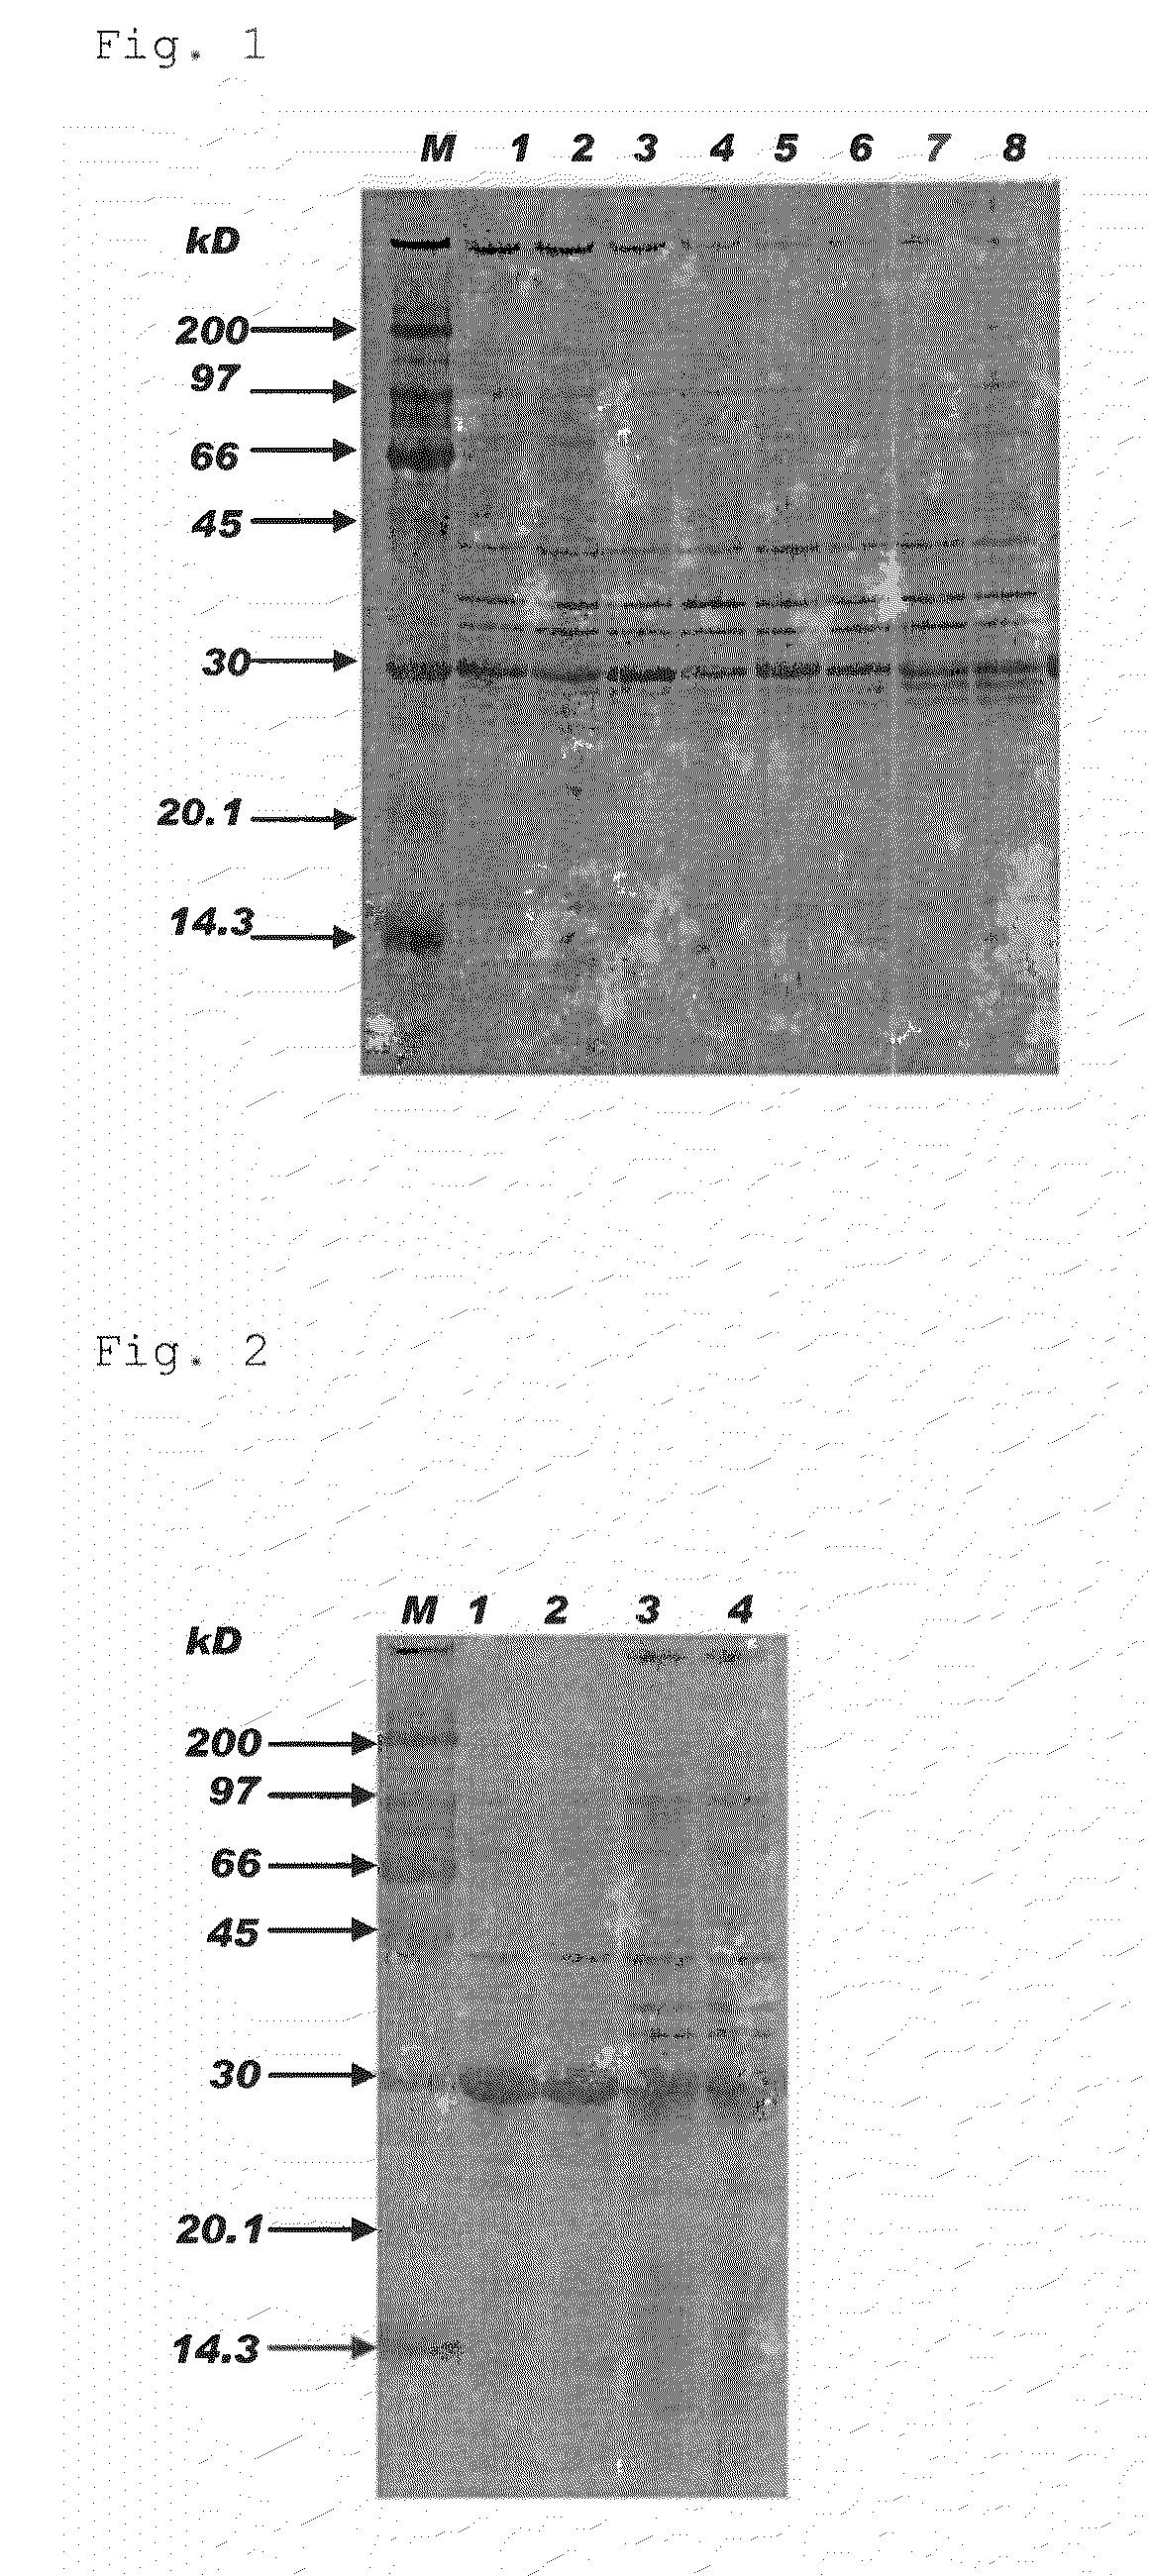 Process for preparing inclusion body-forming protein